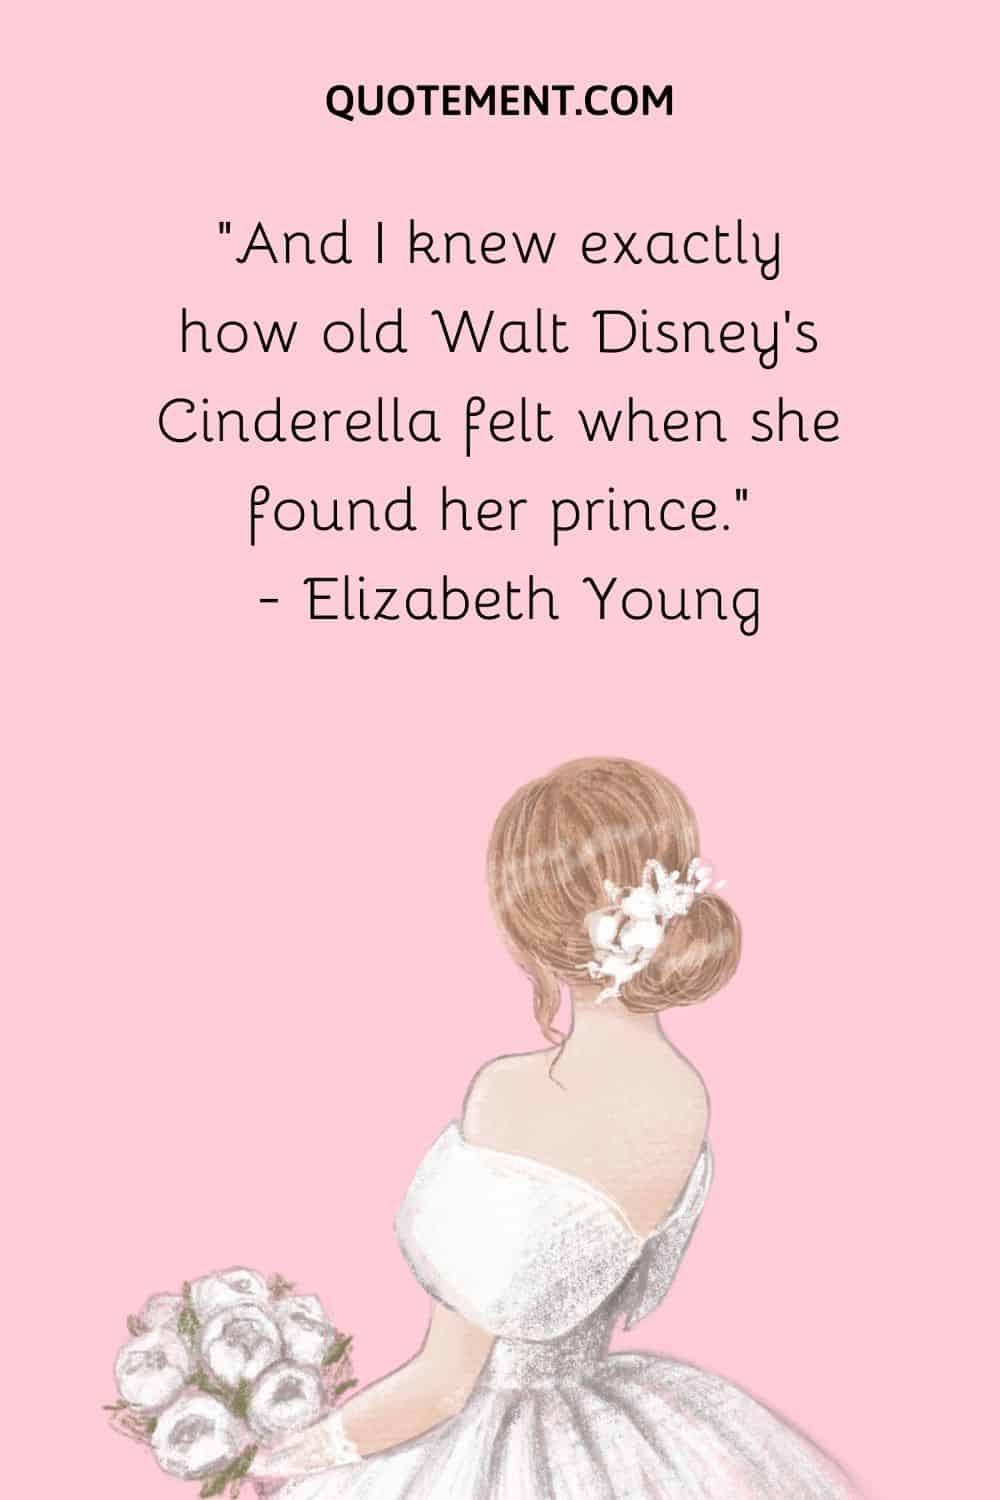 And I knew exactly how old Walt Disney's Cinderella felt when she found her prince. — Elizabeth Young